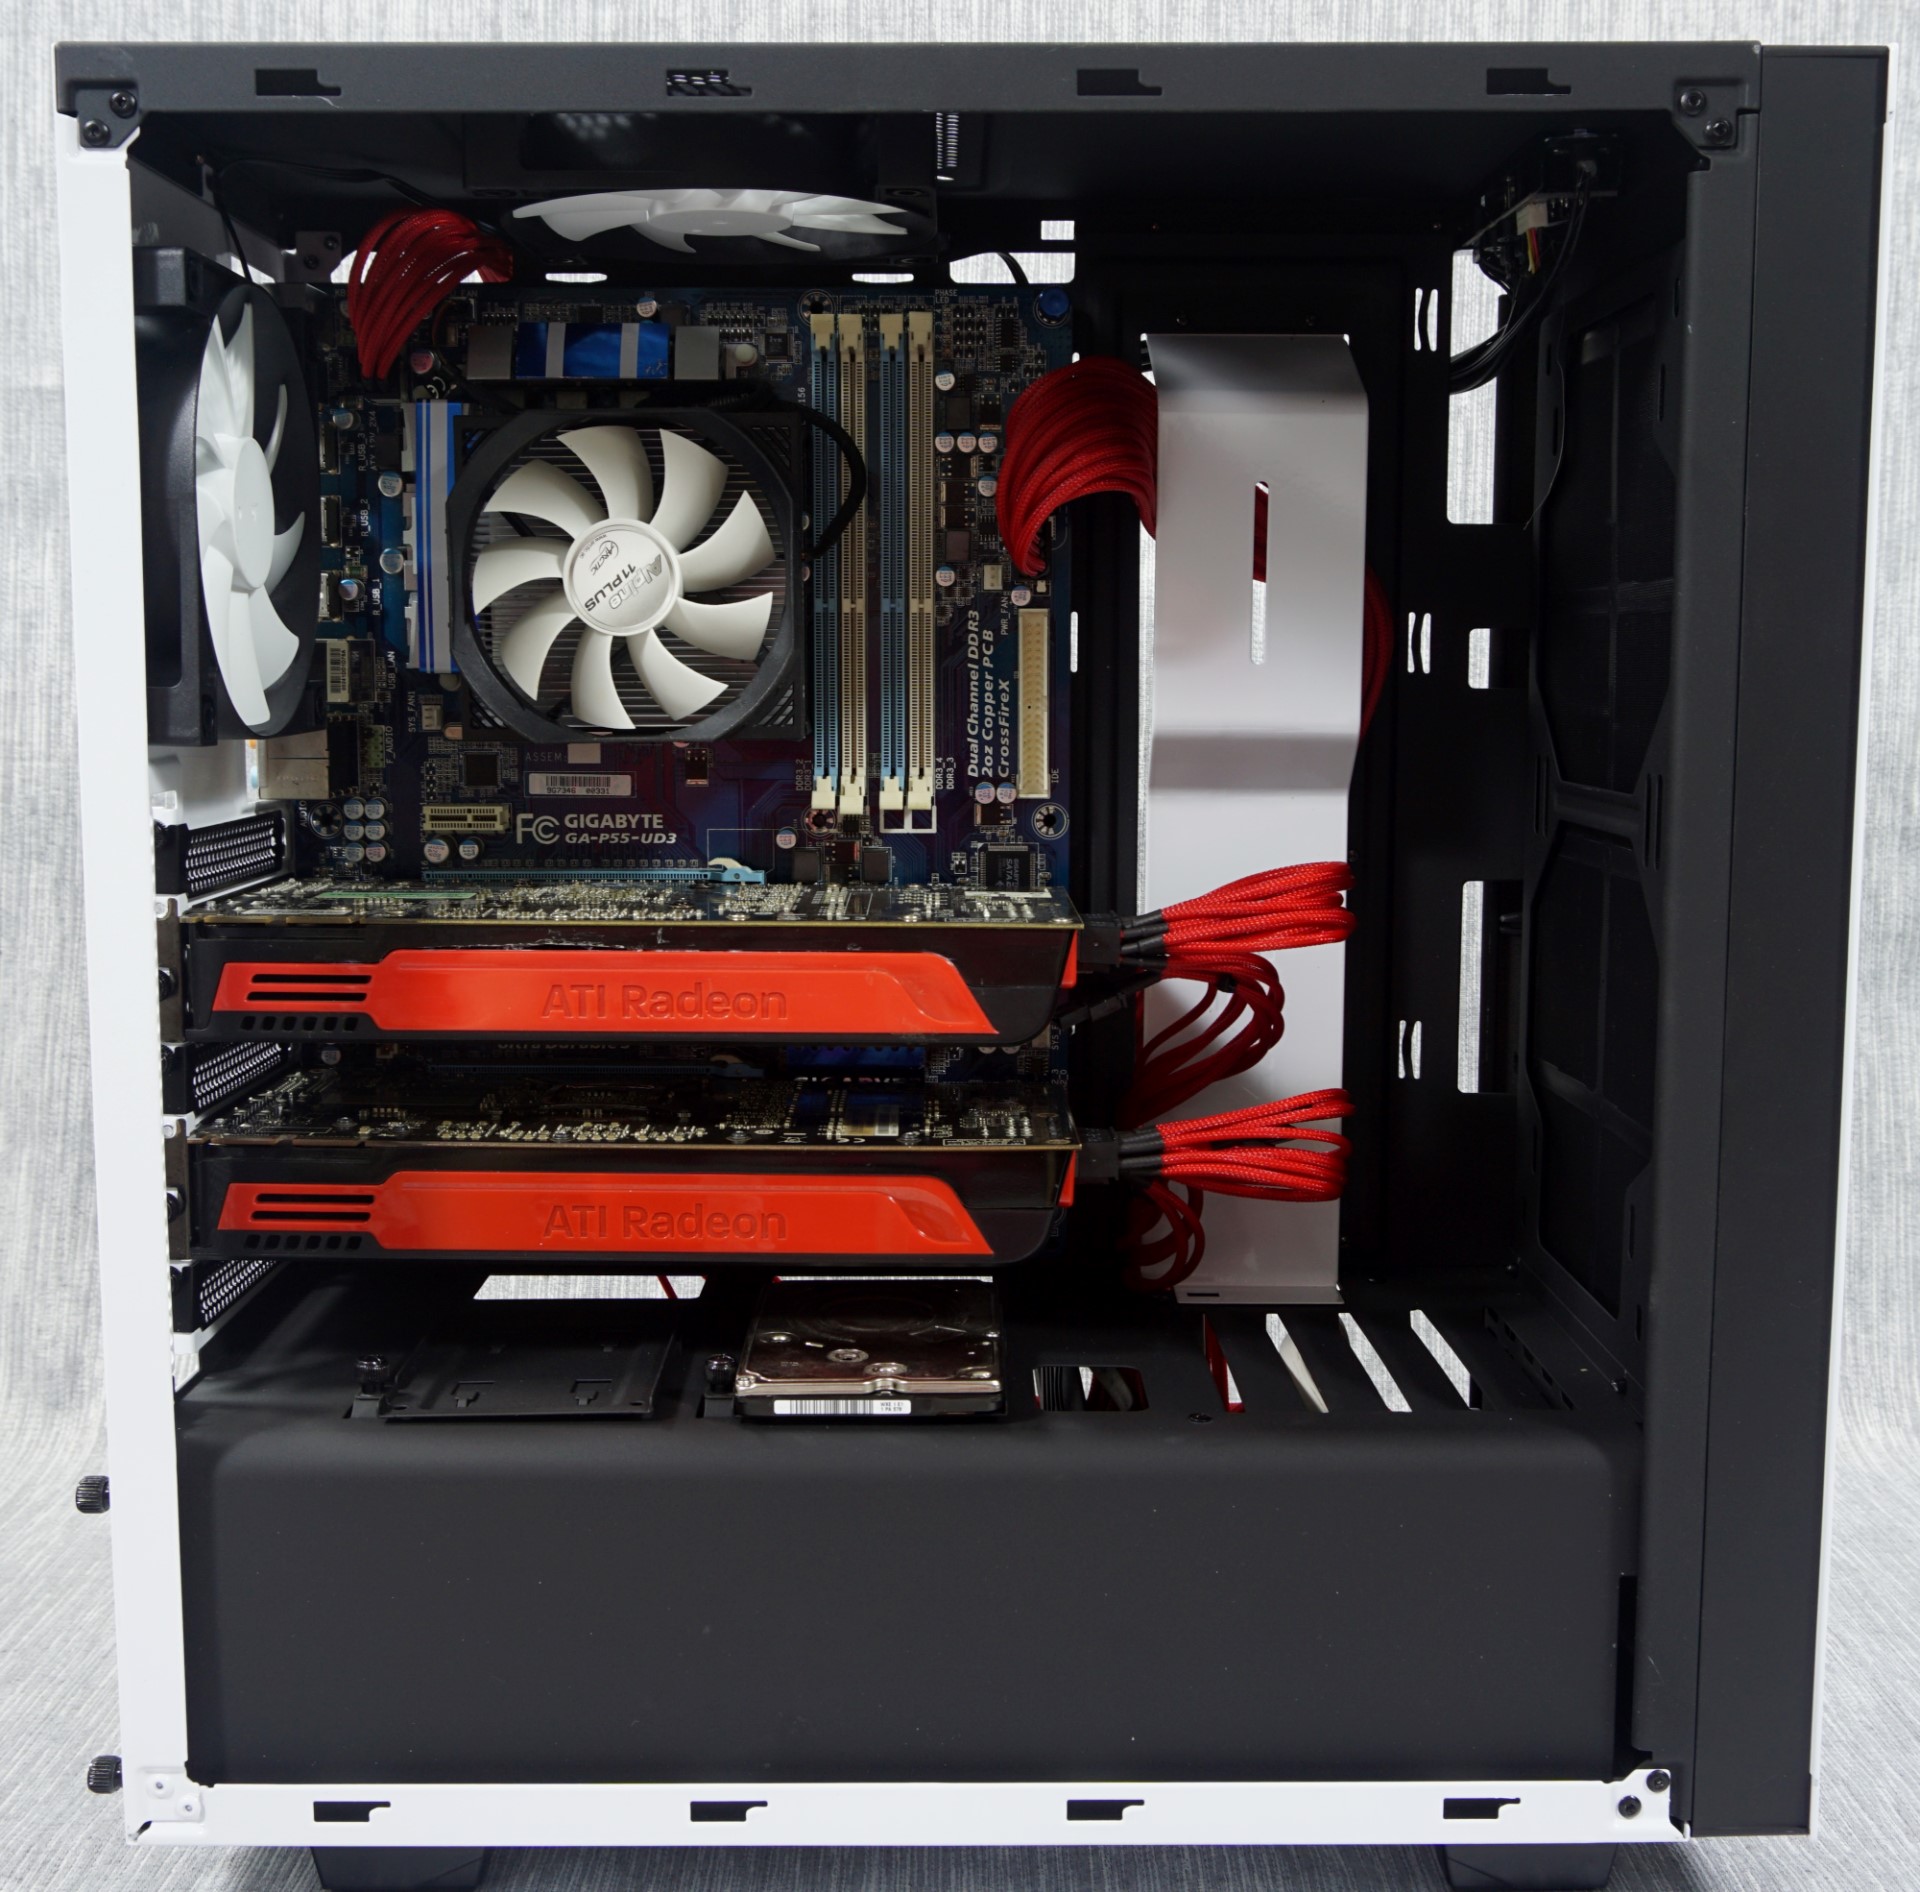 skruenøgle Portal Kritisk The Interior of the NZXT S340 - The NZXT S340 Case Review